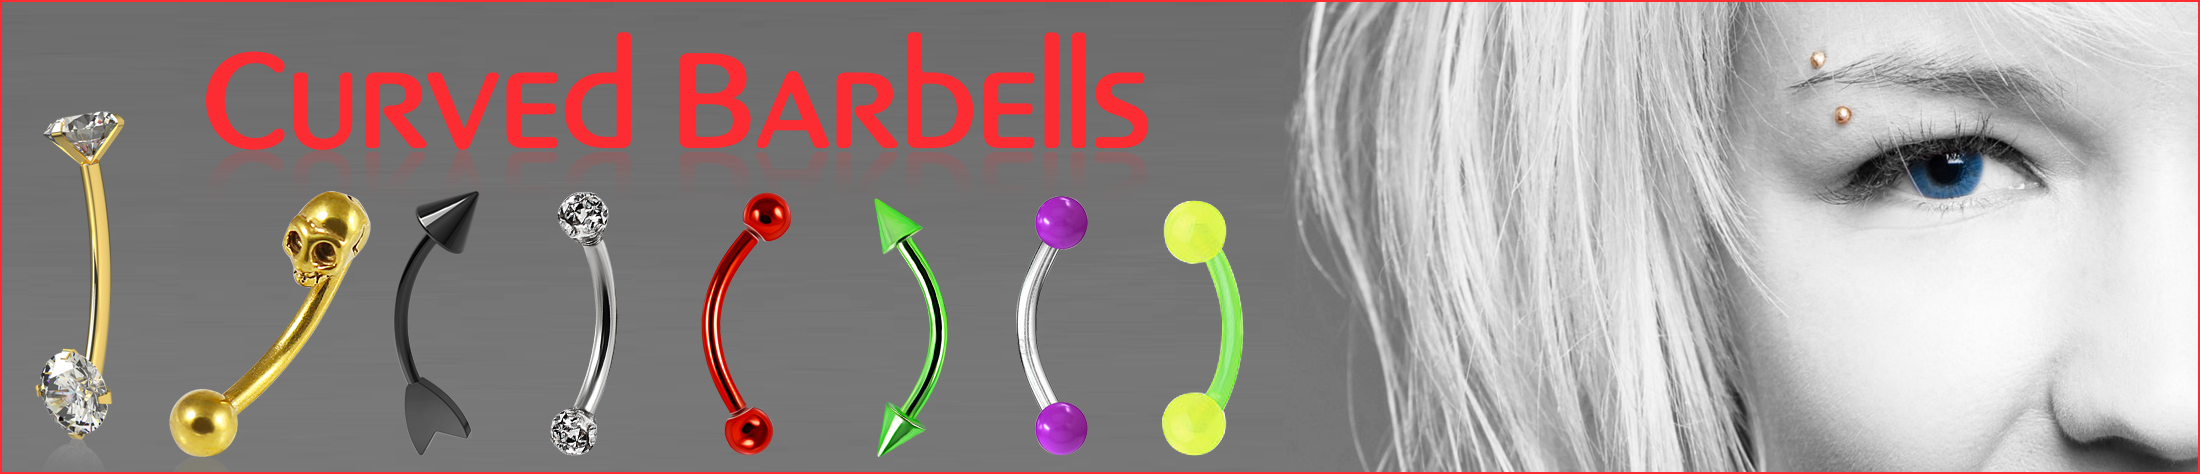 Wholesale Curved Barbells